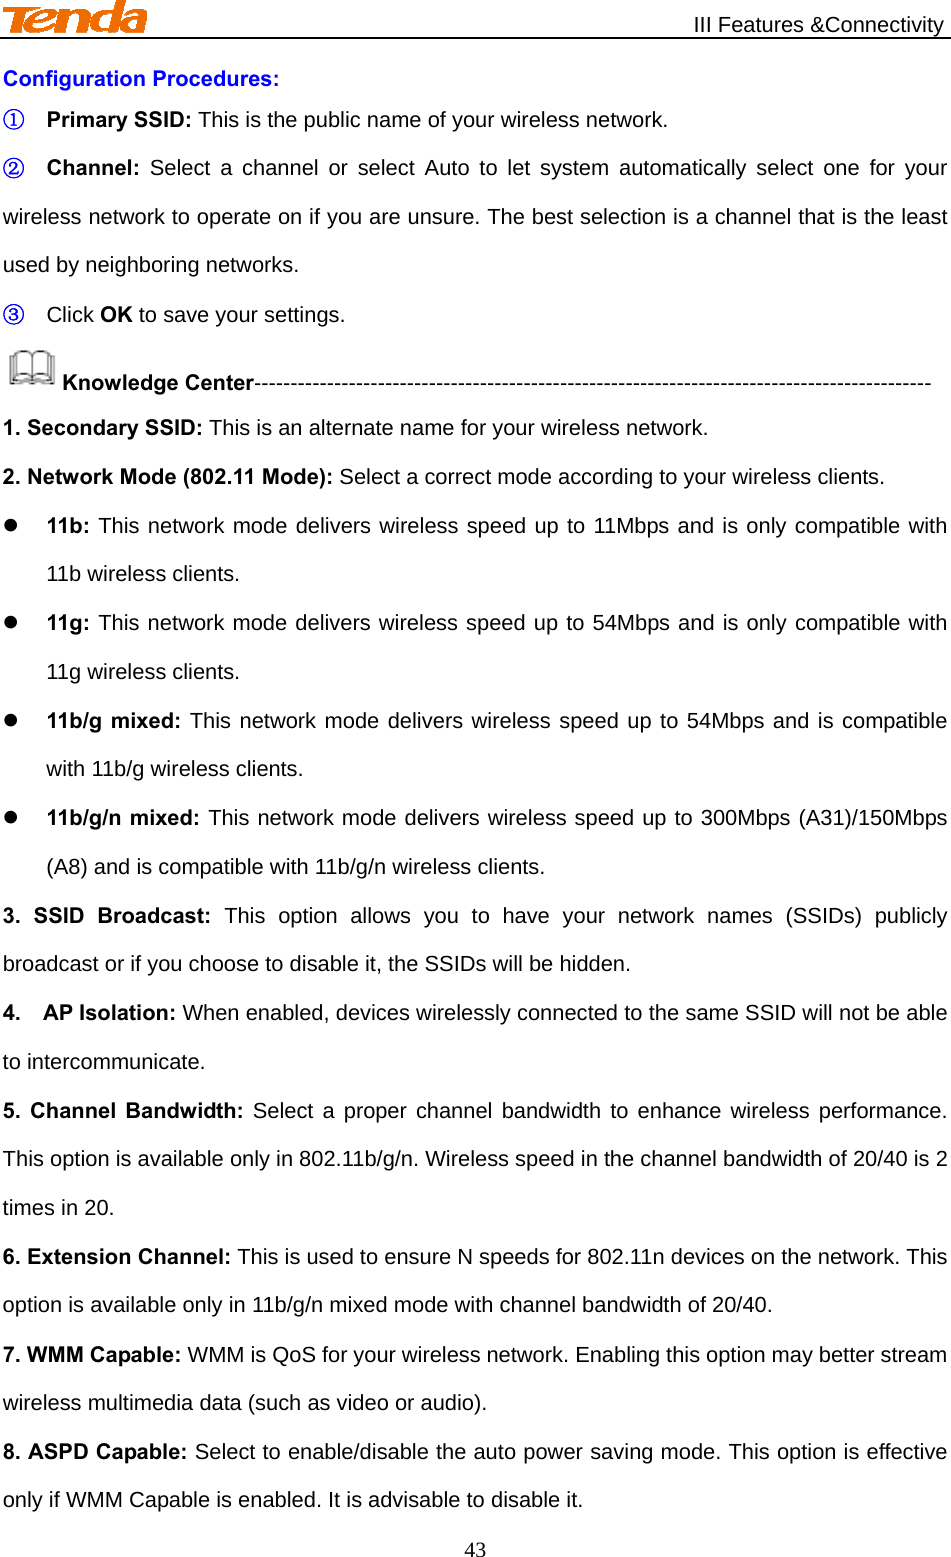                                                   III Features &amp;Connectivity 43 Configuration Procedures: ① Primary SSID: This is the public name of your wireless network. ② Channel: Select a channel or select Auto to let system automatically select one for your wireless network to operate on if you are unsure. The best selection is a channel that is the least used by neighboring networks. ③ Click OK to save your settings. Knowledge Center--------------------------------------------------------------------------------------------- 1. Secondary SSID: This is an alternate name for your wireless network. 2. Network Mode (802.11 Mode): Select a correct mode according to your wireless clients.  11b: This network mode delivers wireless speed up to 11Mbps and is only compatible with 11b wireless clients.  11g: This network mode delivers wireless speed up to 54Mbps and is only compatible with 11g wireless clients.  11b/g mixed: This network mode delivers wireless speed up to 54Mbps and is compatible with 11b/g wireless clients.  11b/g/n mixed: This network mode delivers wireless speed up to 300Mbps (A31)/150Mbps (A8) and is compatible with 11b/g/n wireless clients. 3. SSID Broadcast: This option allows you to have your network names (SSIDs) publicly broadcast or if you choose to disable it, the SSIDs will be hidden. 4.  AP Isolation: When enabled, devices wirelessly connected to the same SSID will not be able to intercommunicate. 5. Channel Bandwidth: Select a proper channel bandwidth to enhance wireless performance. This option is available only in 802.11b/g/n. Wireless speed in the channel bandwidth of 20/40 is 2 times in 20. 6. Extension Channel: This is used to ensure N speeds for 802.11n devices on the network. This option is available only in 11b/g/n mixed mode with channel bandwidth of 20/40. 7. WMM Capable: WMM is QoS for your wireless network. Enabling this option may better stream wireless multimedia data (such as video or audio). 8. ASPD Capable: Select to enable/disable the auto power saving mode. This option is effective only if WMM Capable is enabled. It is advisable to disable it. 